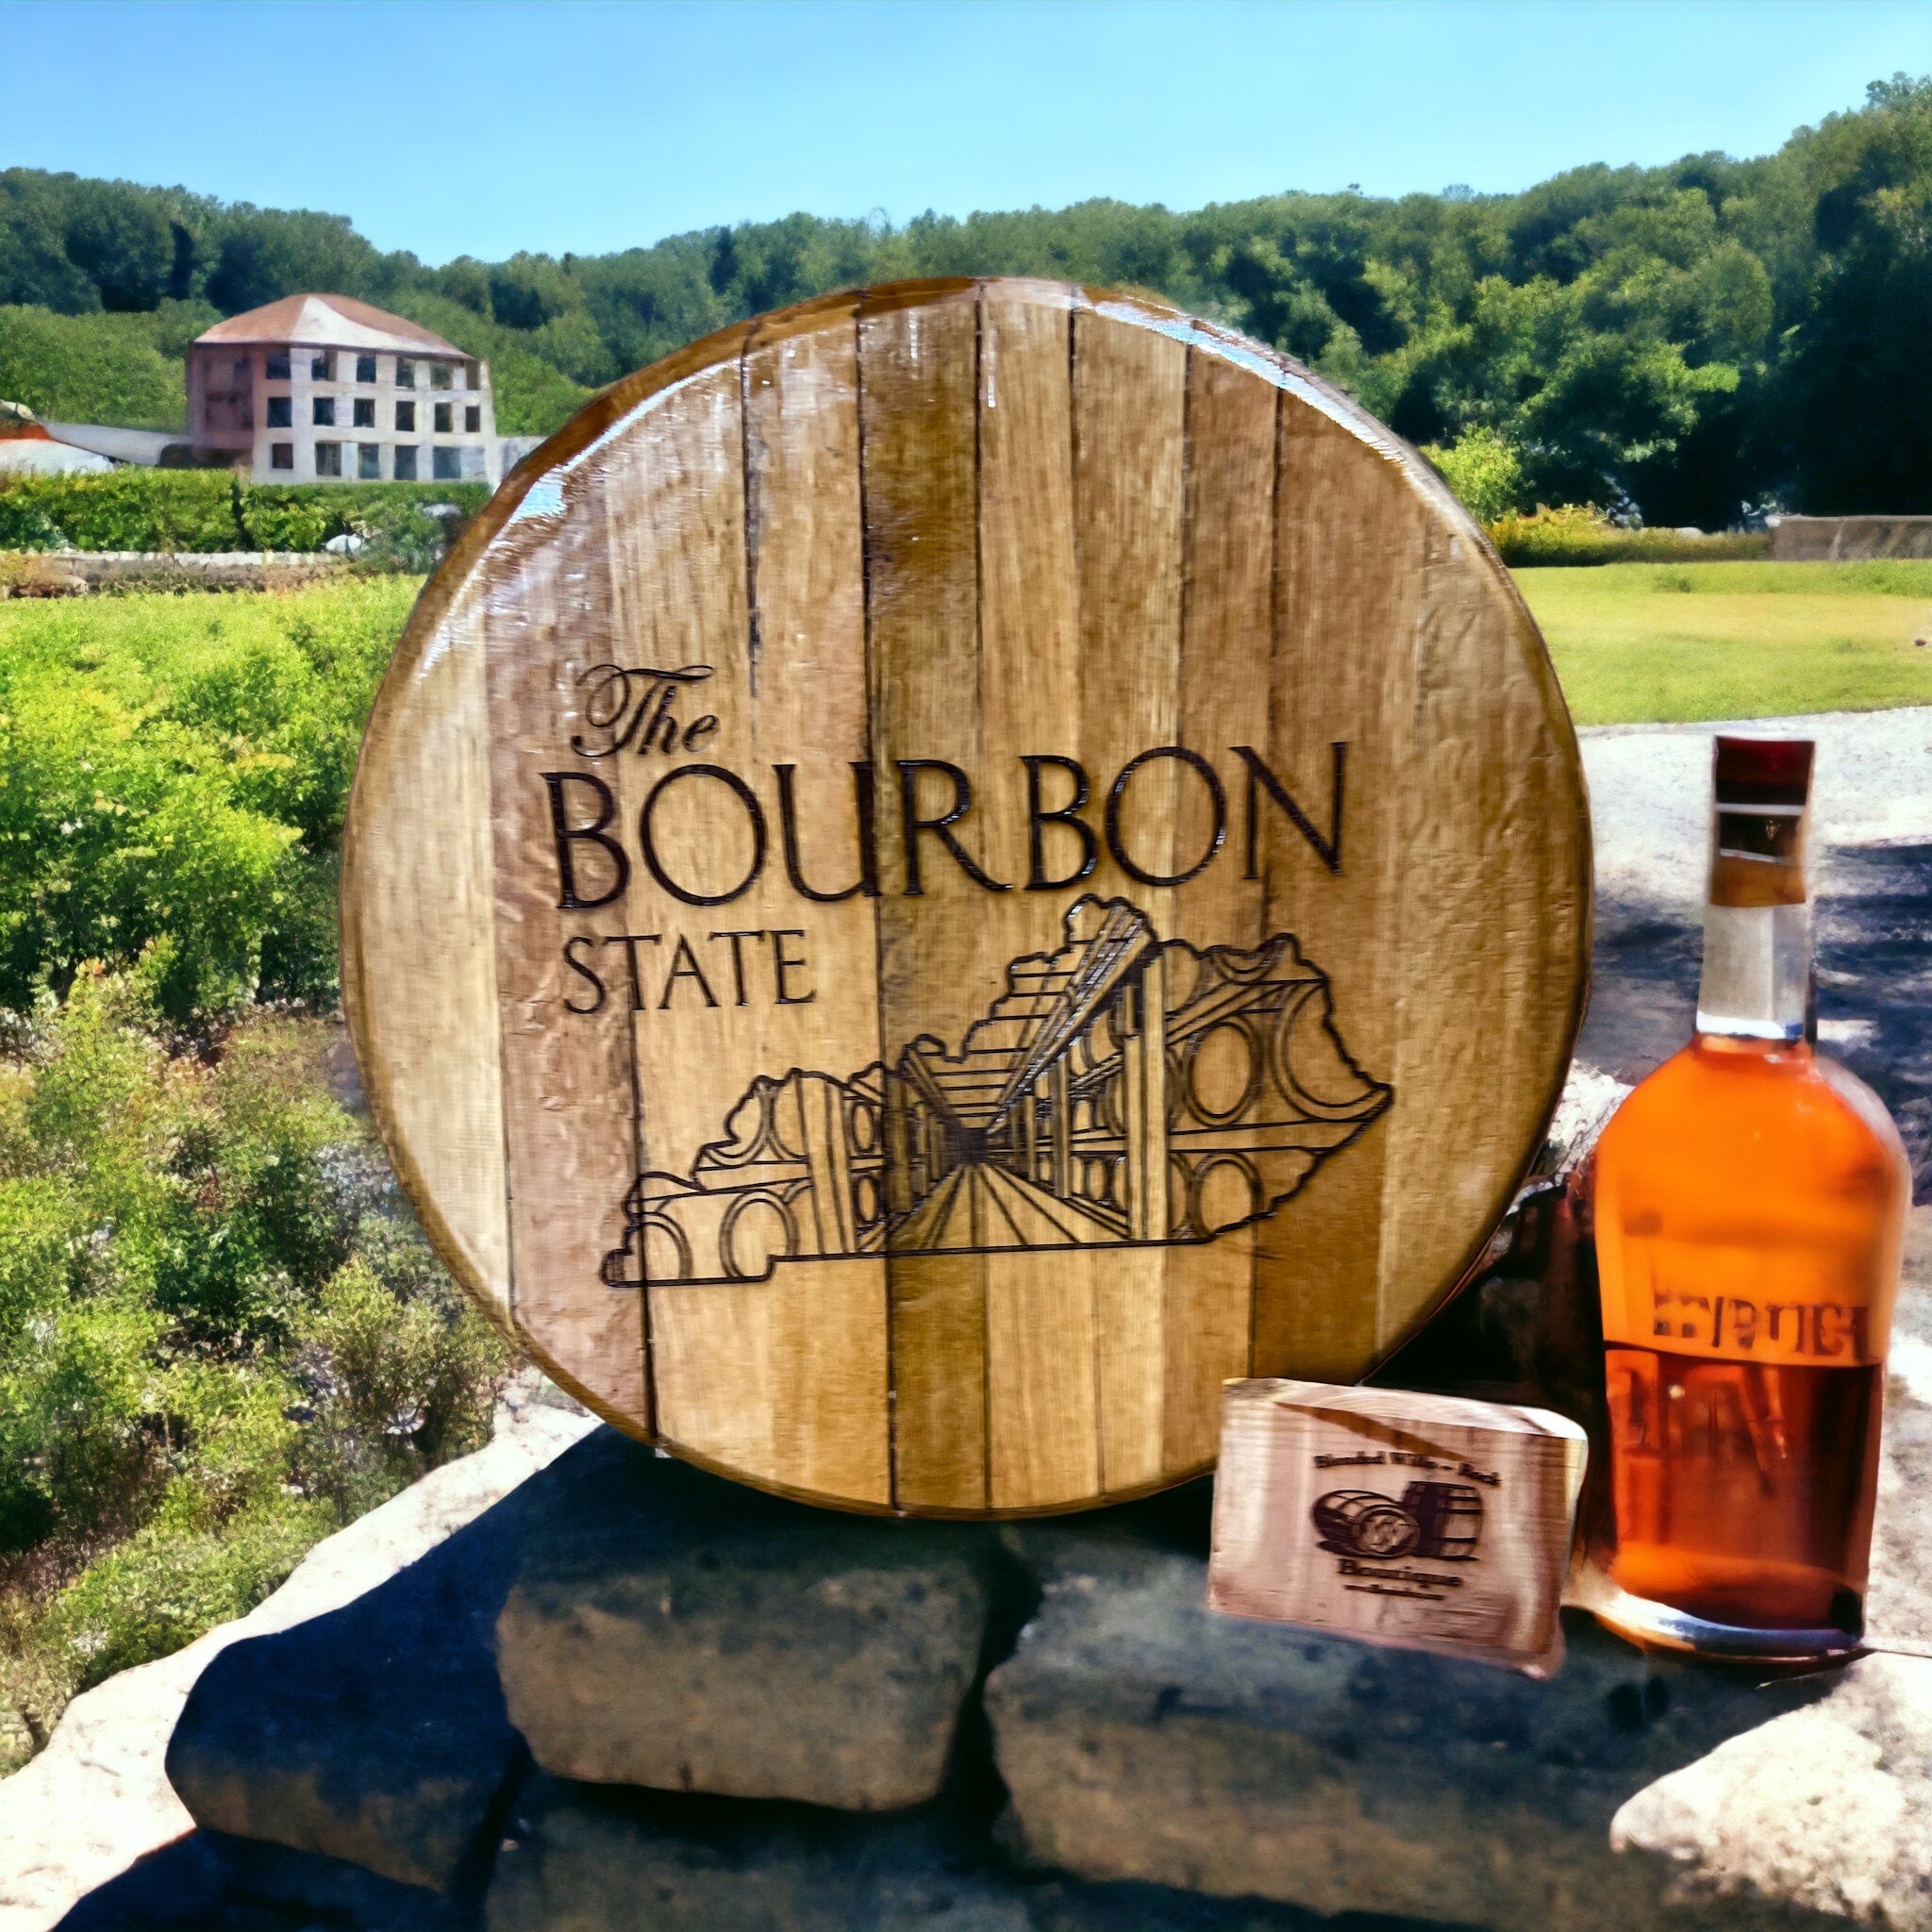 The Bourbon state